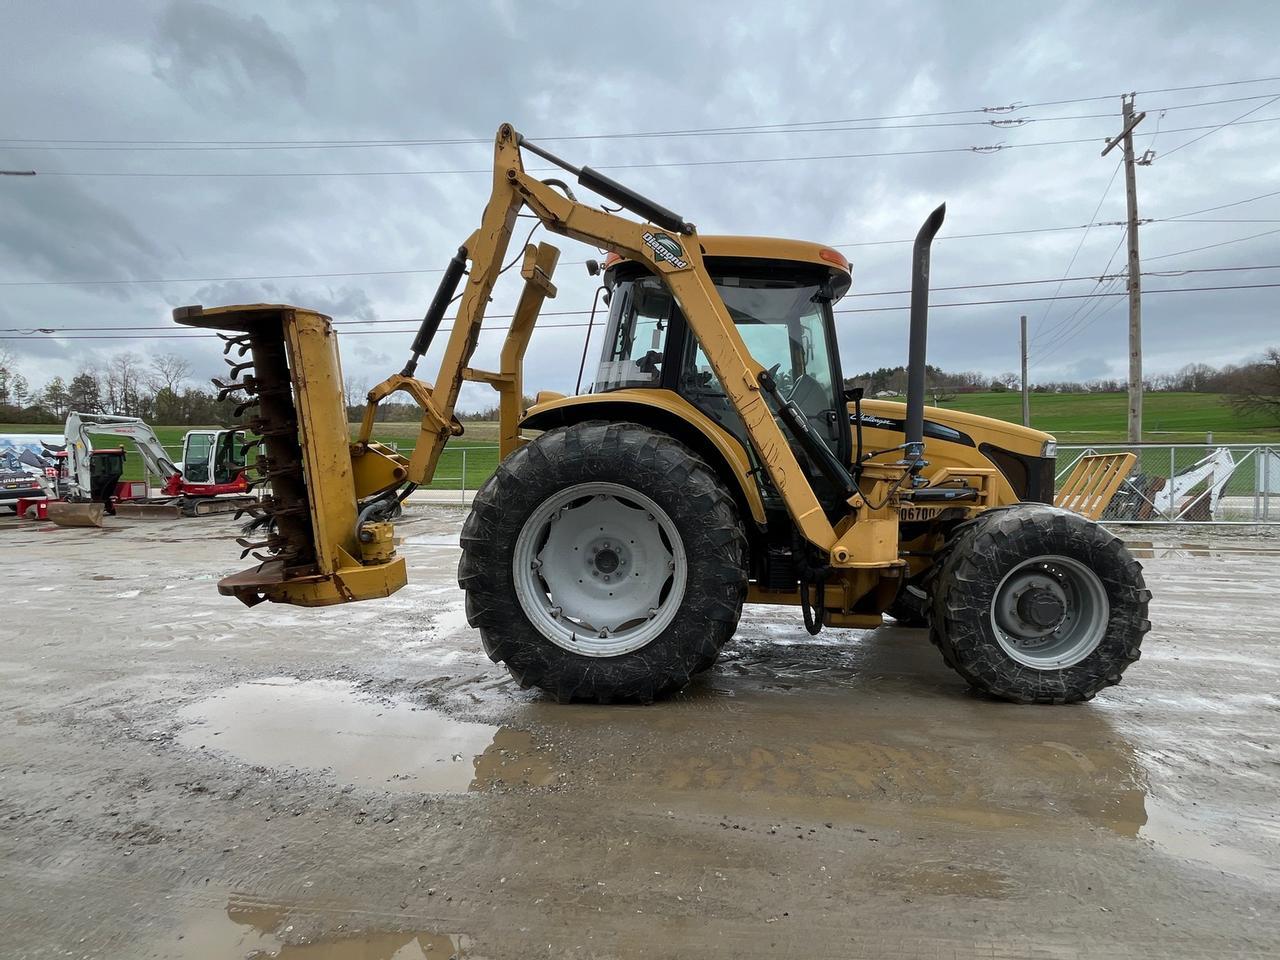 2013 Challenger MT465B Tractor with Cab and Boom Mower